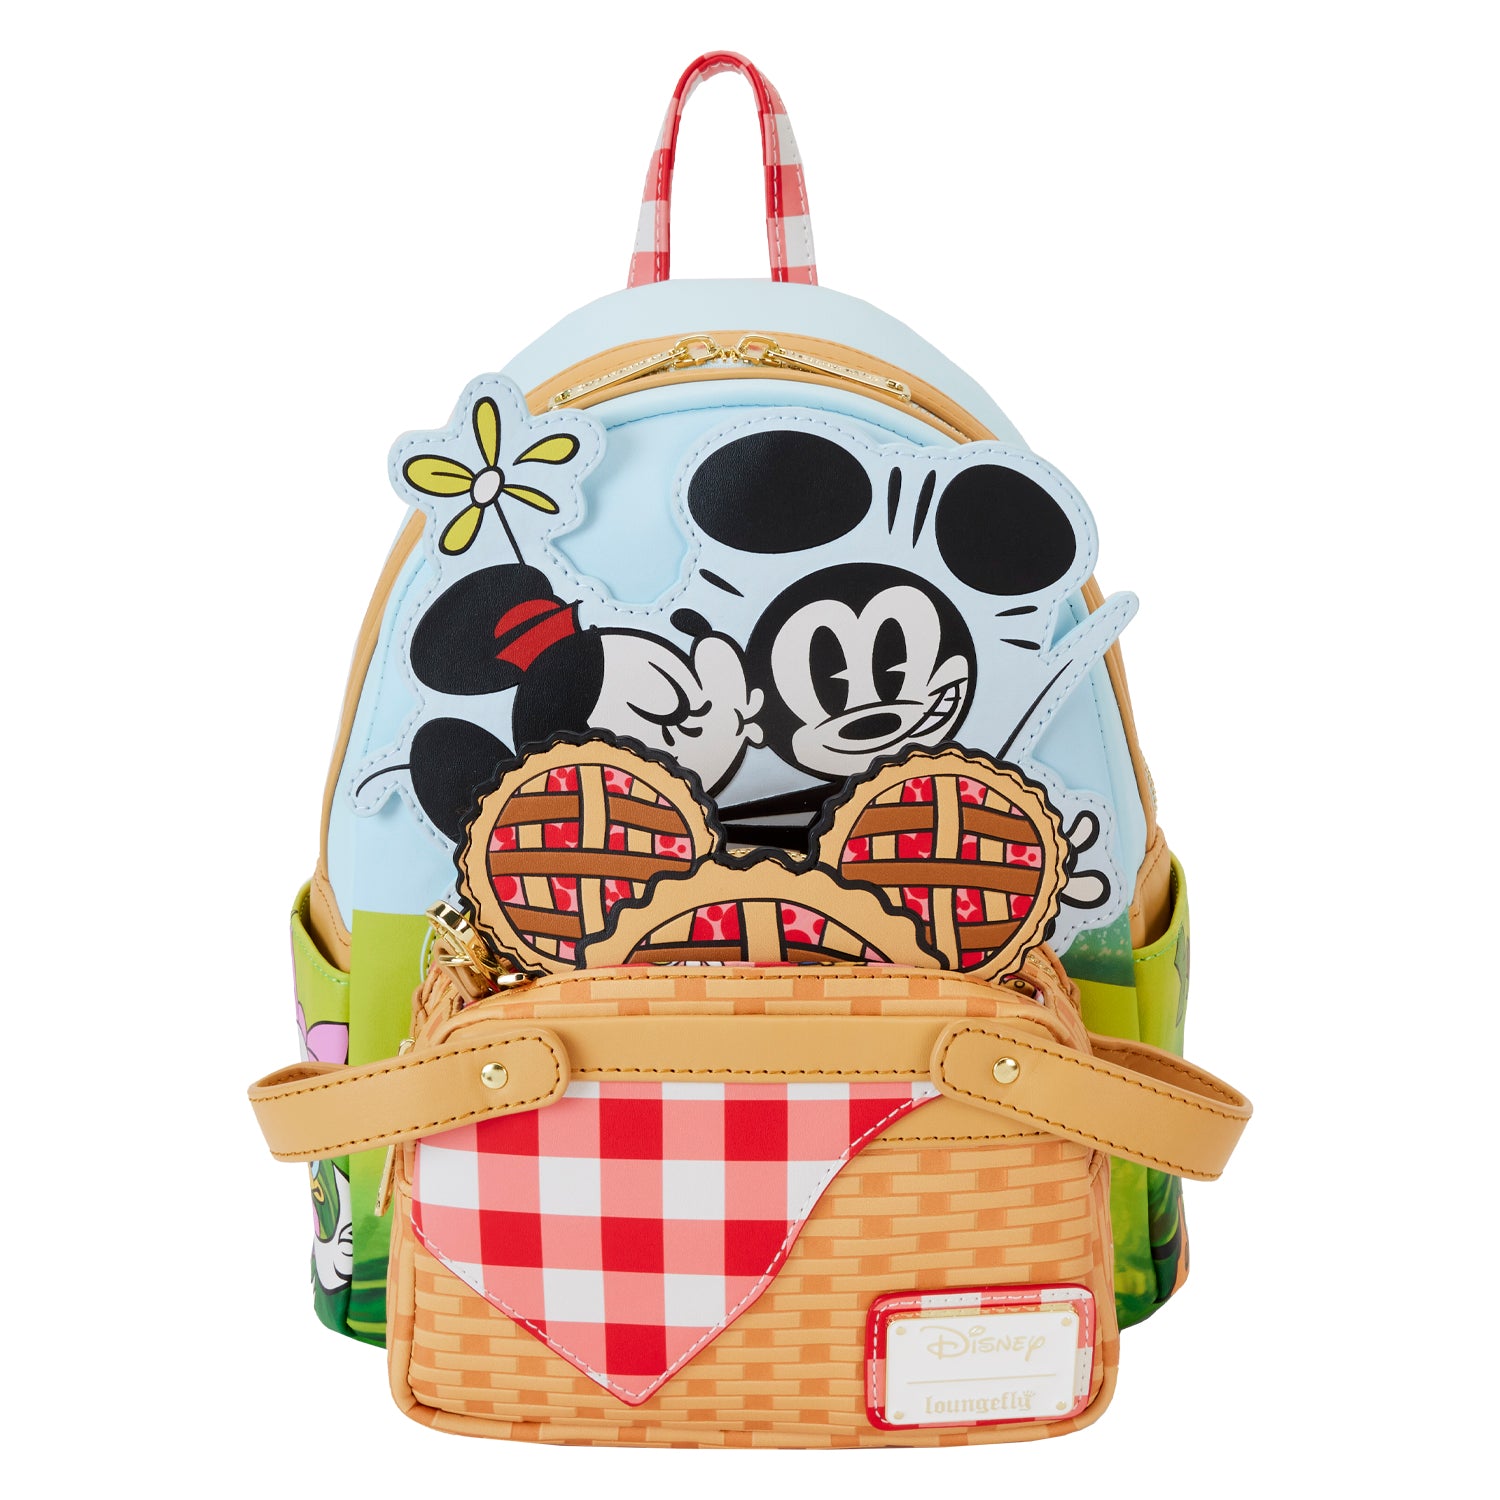 Loungefly Disney Mickey and Friends Picnic Mini Backpack